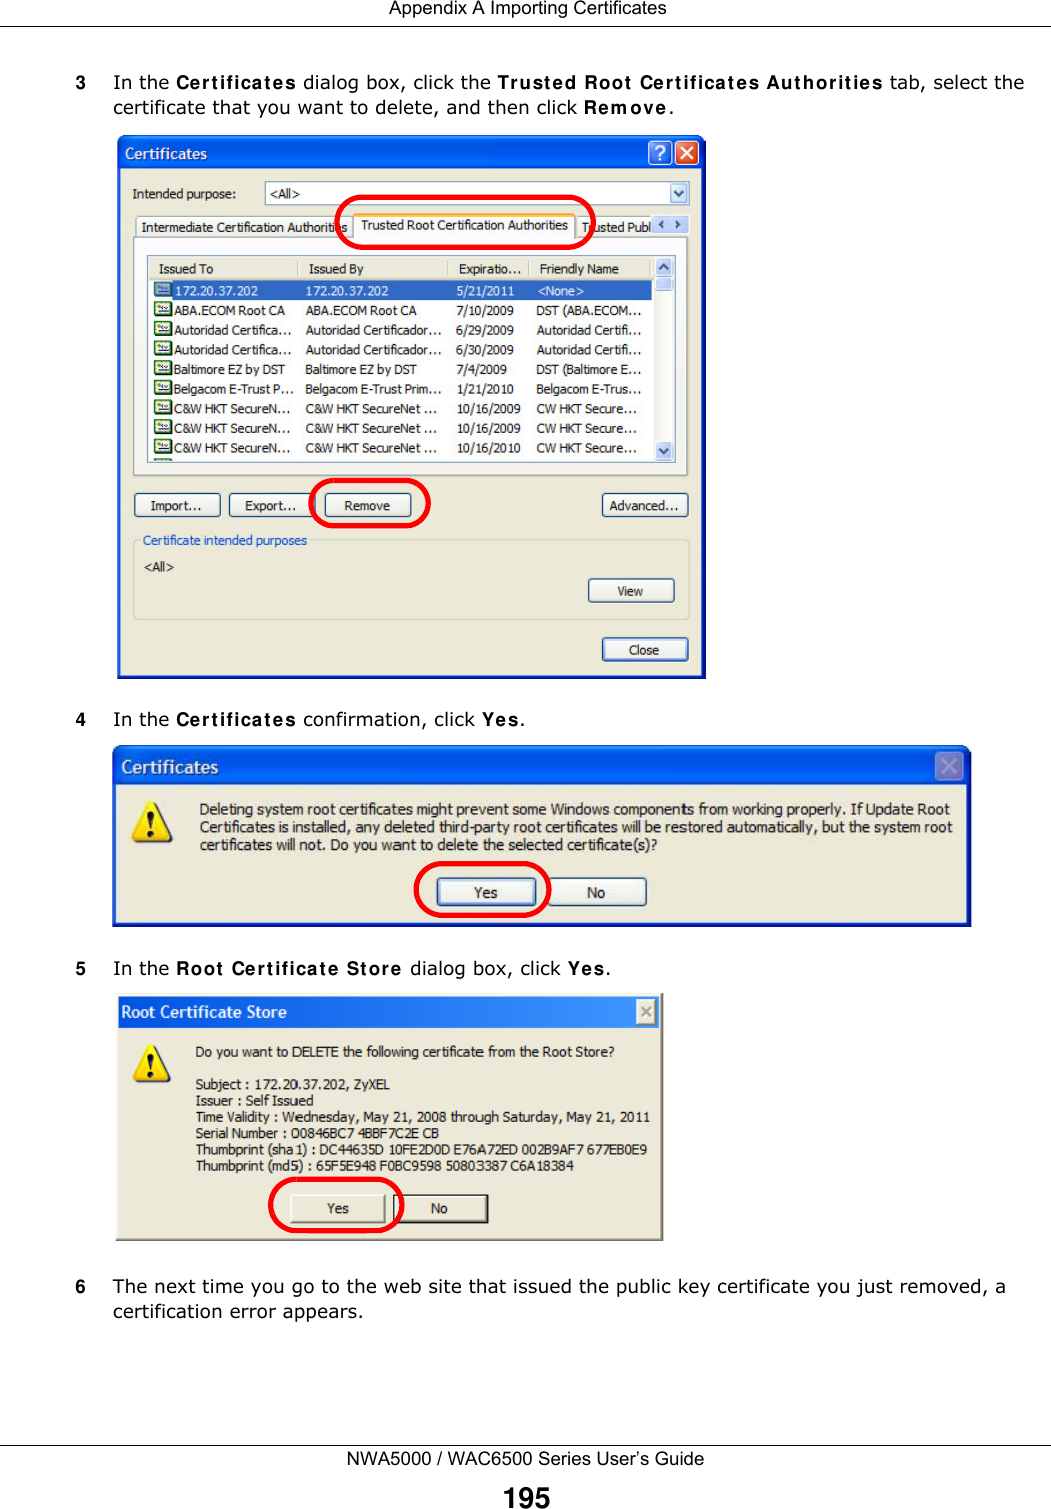  Appendix A Importing CertificatesNWA5000 / WAC6500 Series User’s Guide1953In the Cer tificat es dialog box, click the Trust ed Root  Cert ifica te s Auth or ities tab, select the certificate that you want to delete, and then click Rem ove.4In the Cer tificat es confirmation, click Yes.5In the Root Cert ificat e St or e dialog box, click Ye s.6The next time you go to the web site that issued the public key certificate you just removed, a certification error appears.